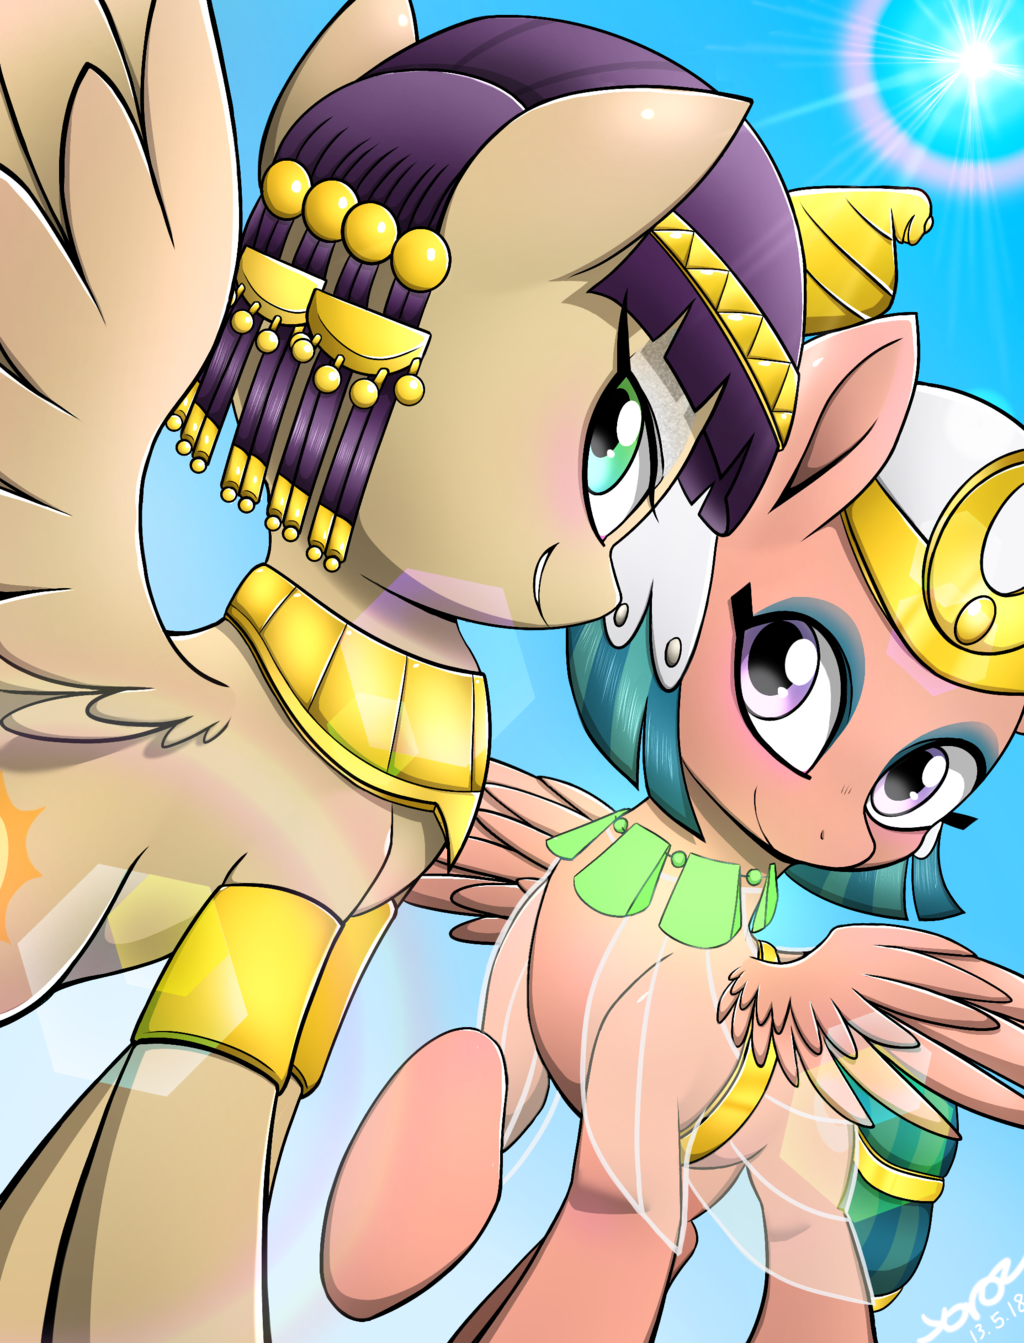 egyptians_by_yorozpony-dcbeho0.png